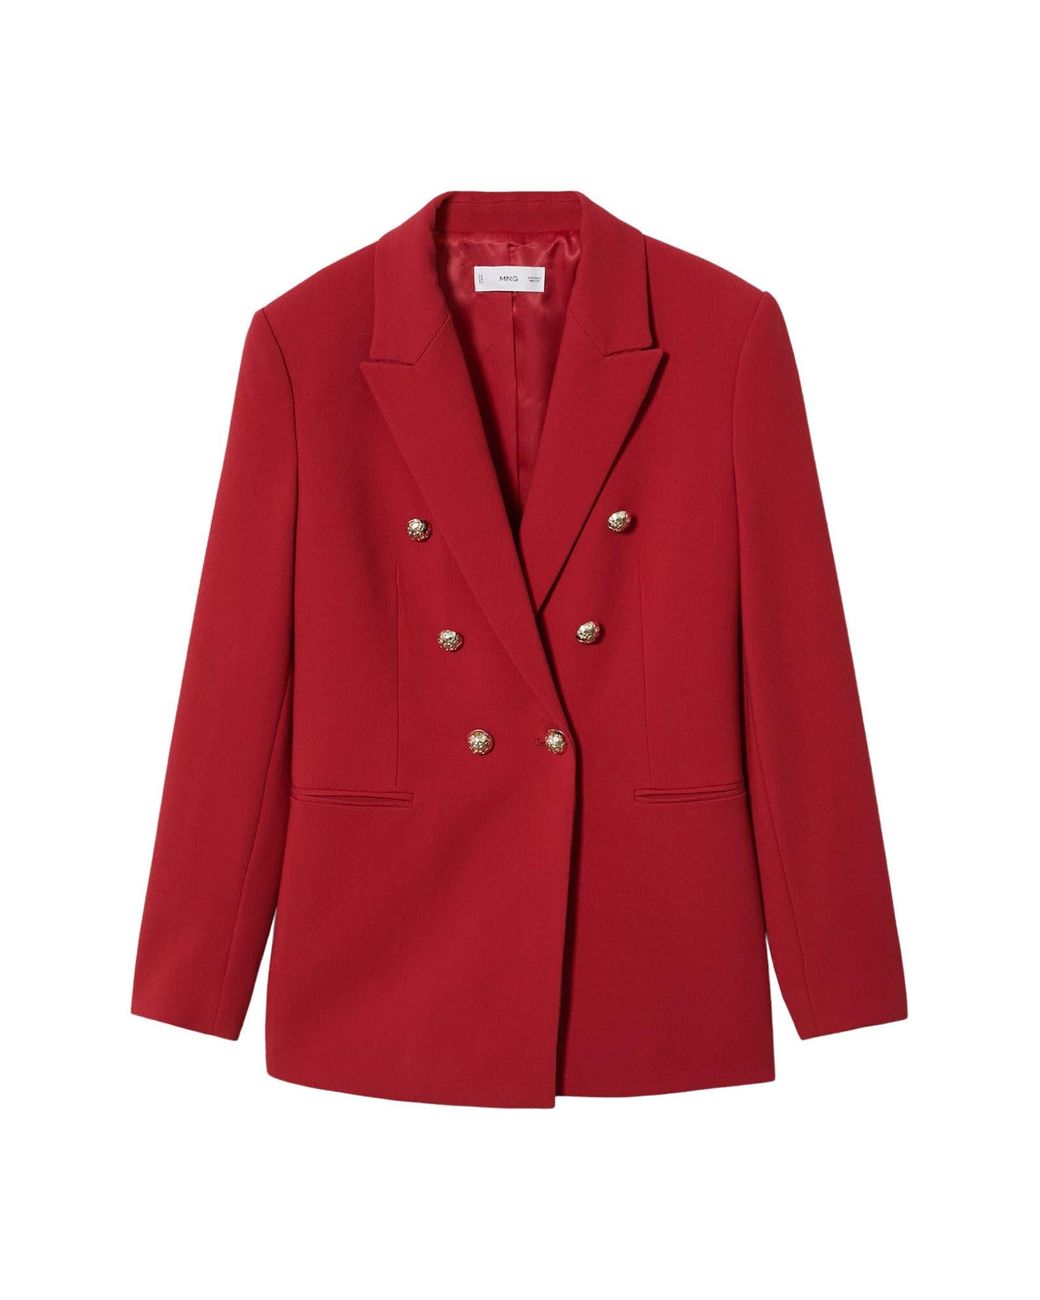 Mango Double Breasted Blazer In Red At Nordstrom Rack | Lyst